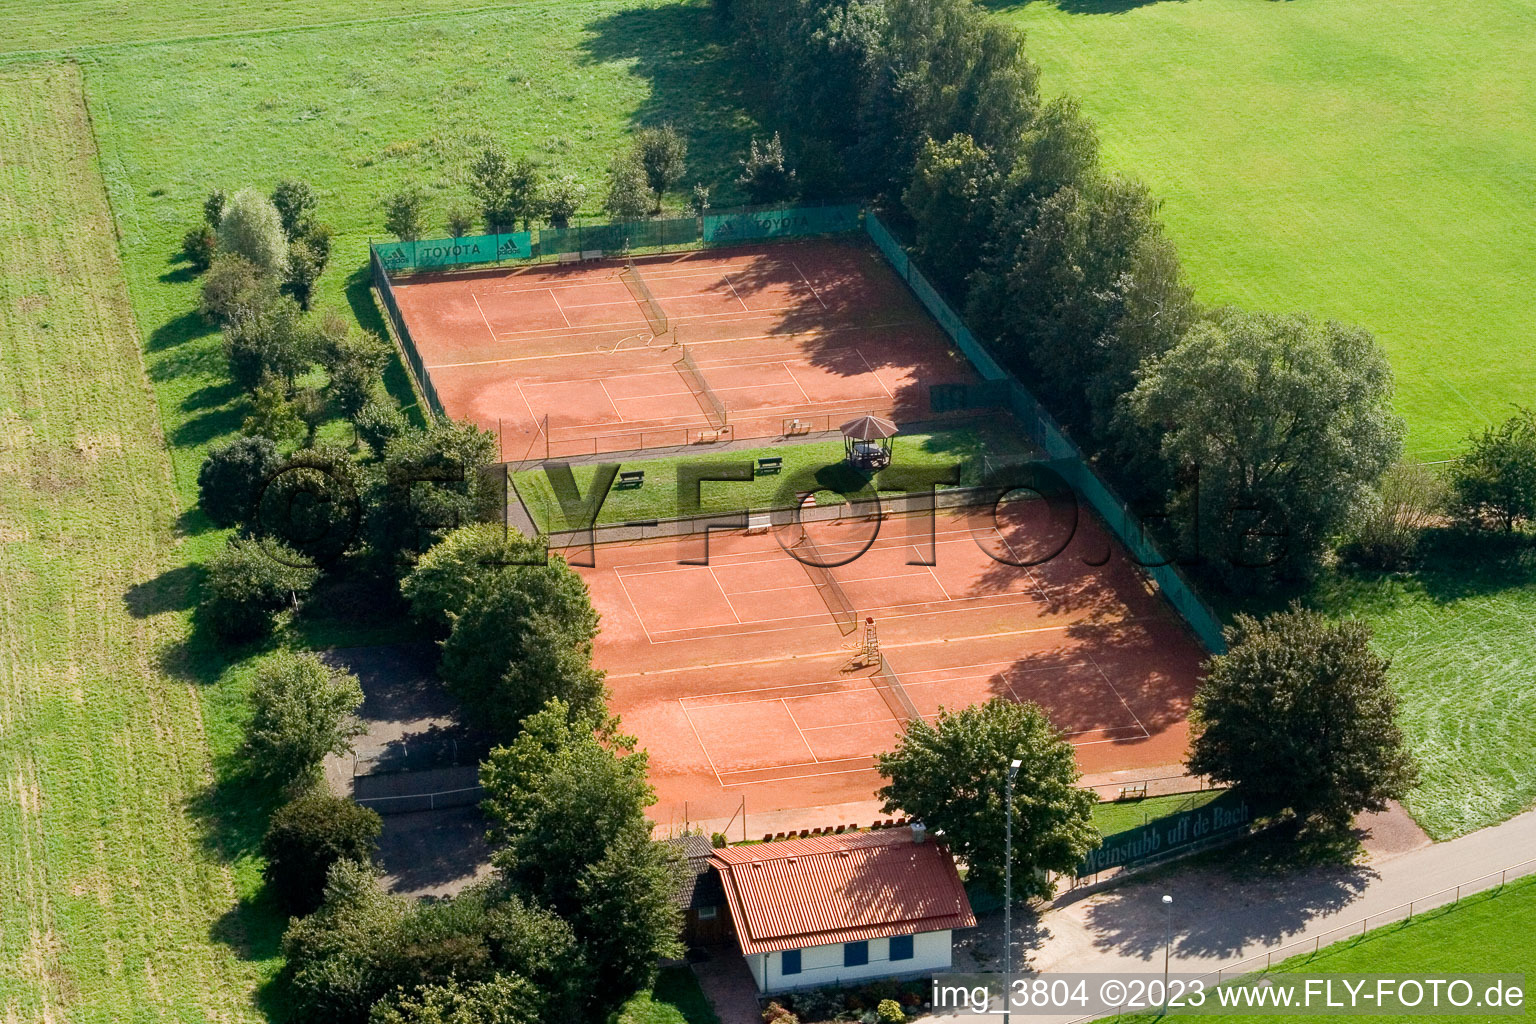 Aerial photograpy of Tennis club in Minfeld in the state Rhineland-Palatinate, Germany